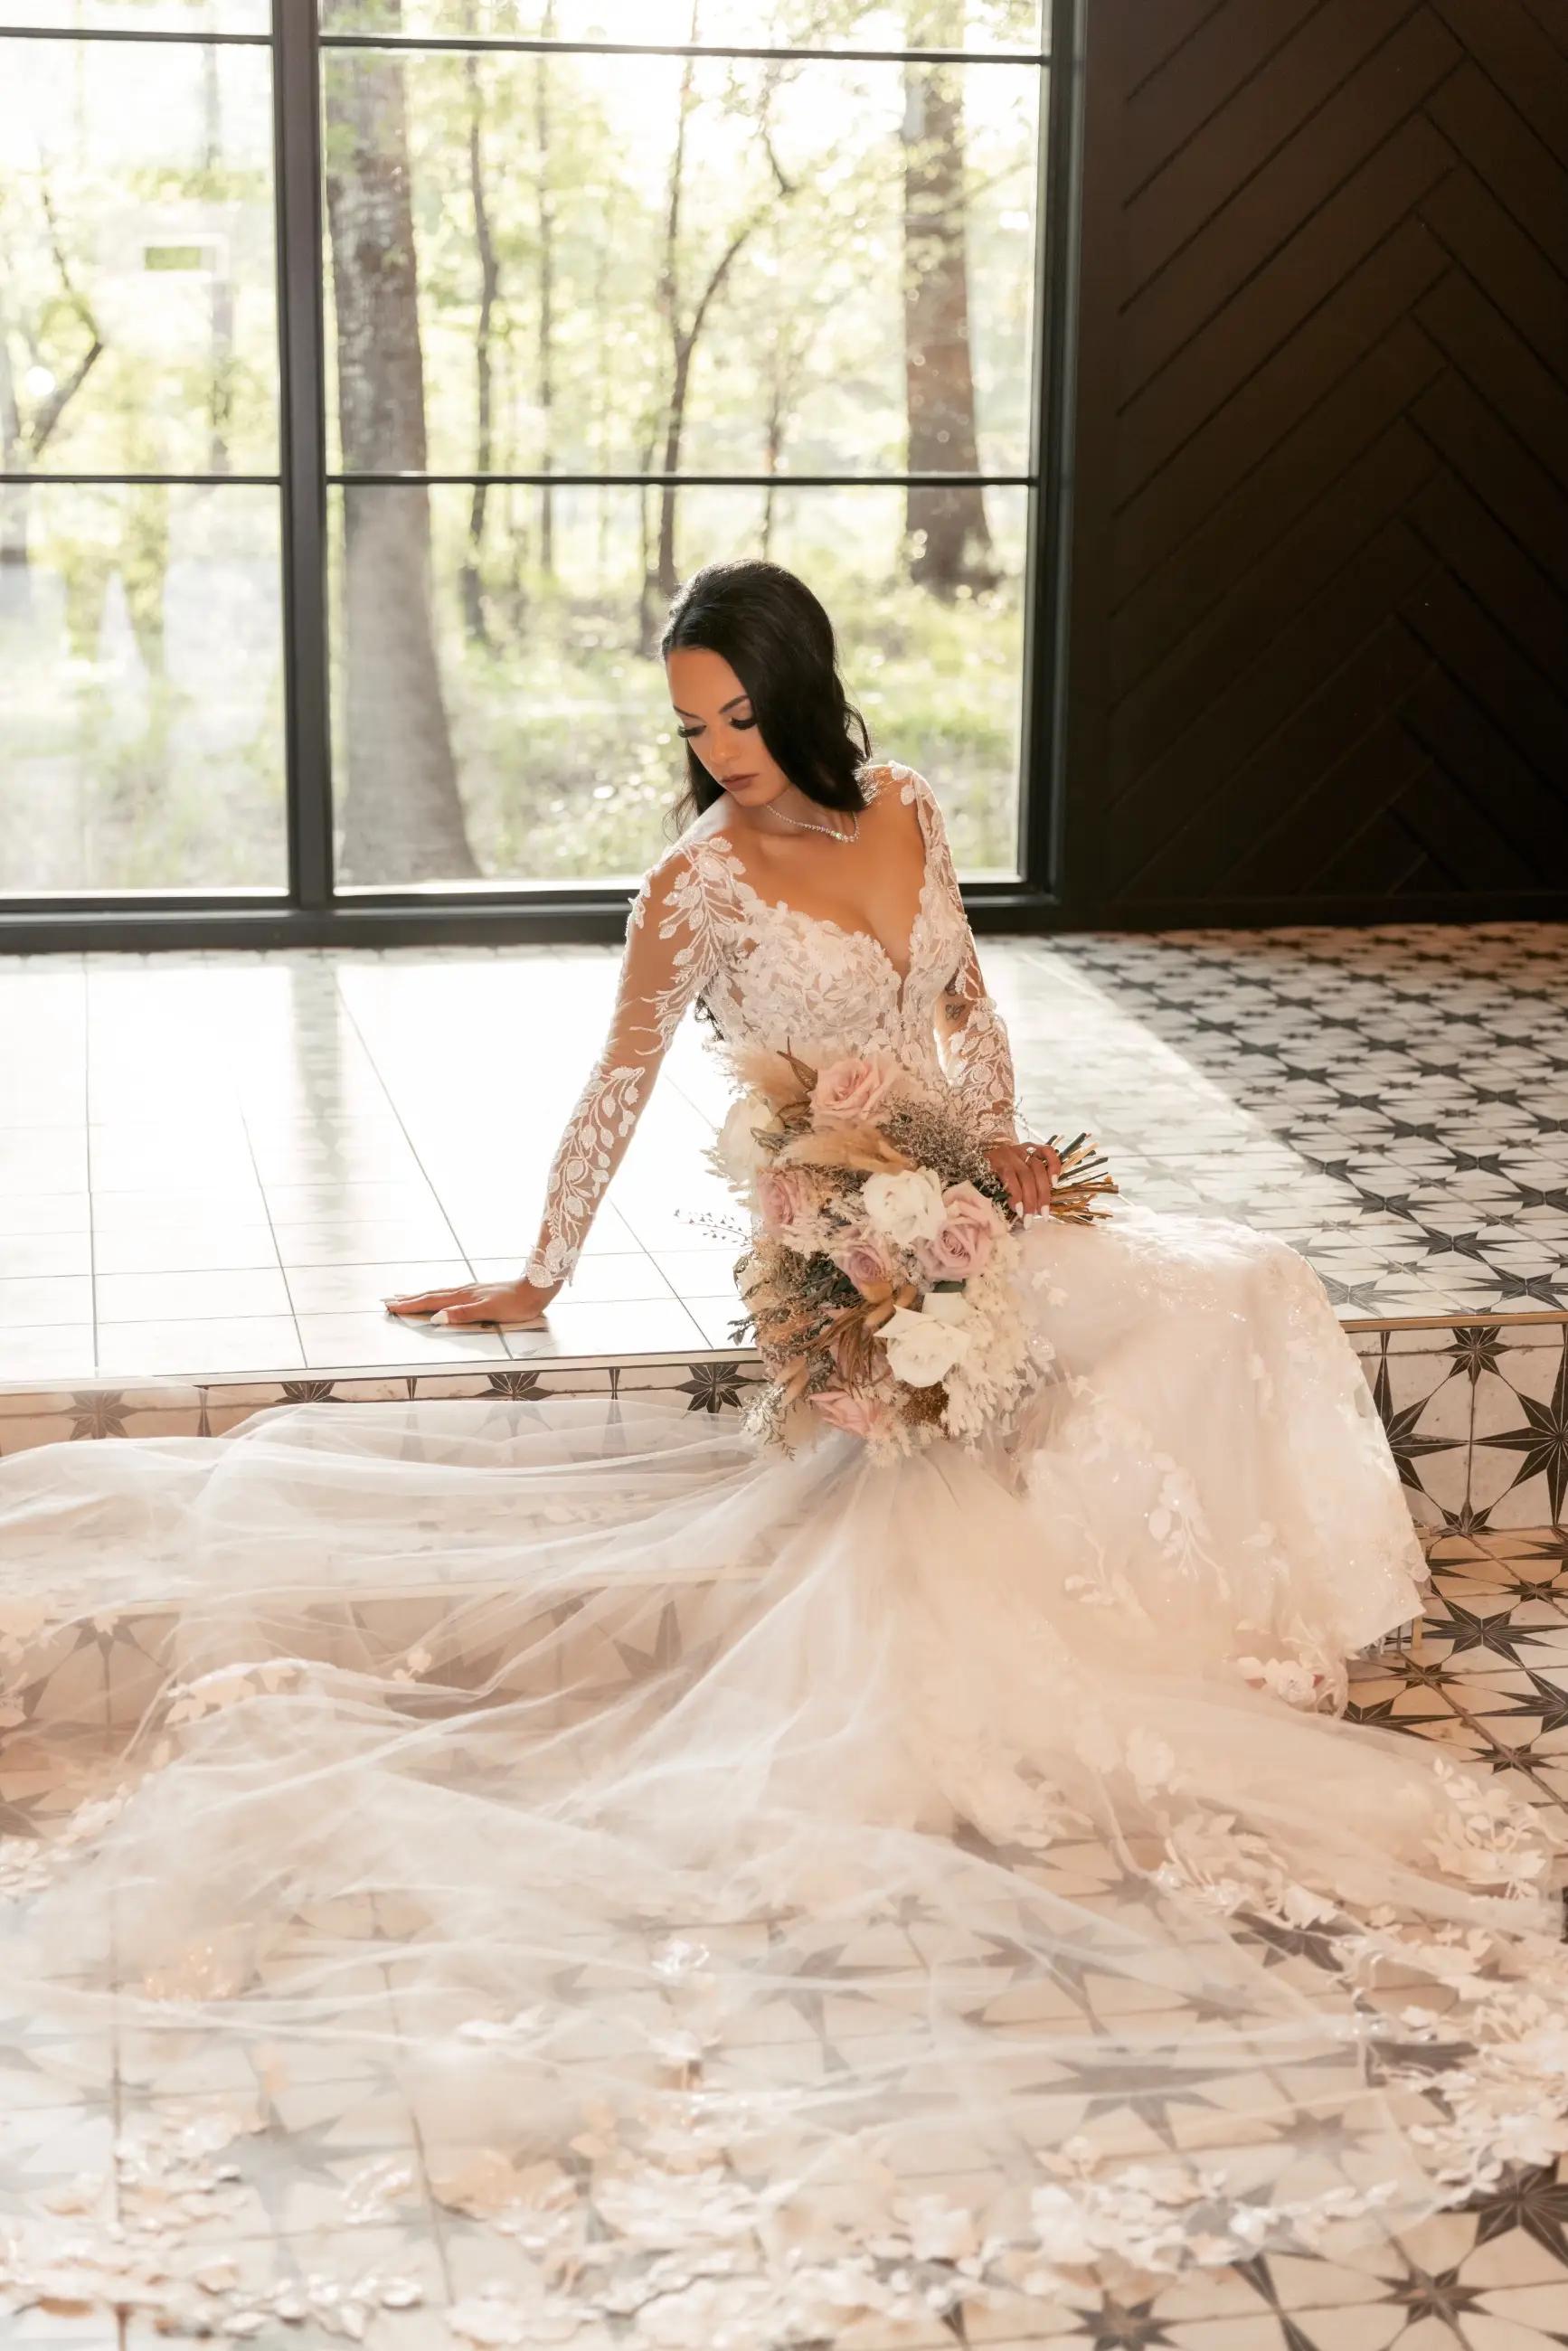 Upcoming Wedding Dress Trends: What&#39;s Hot in Bridal Fashion Image